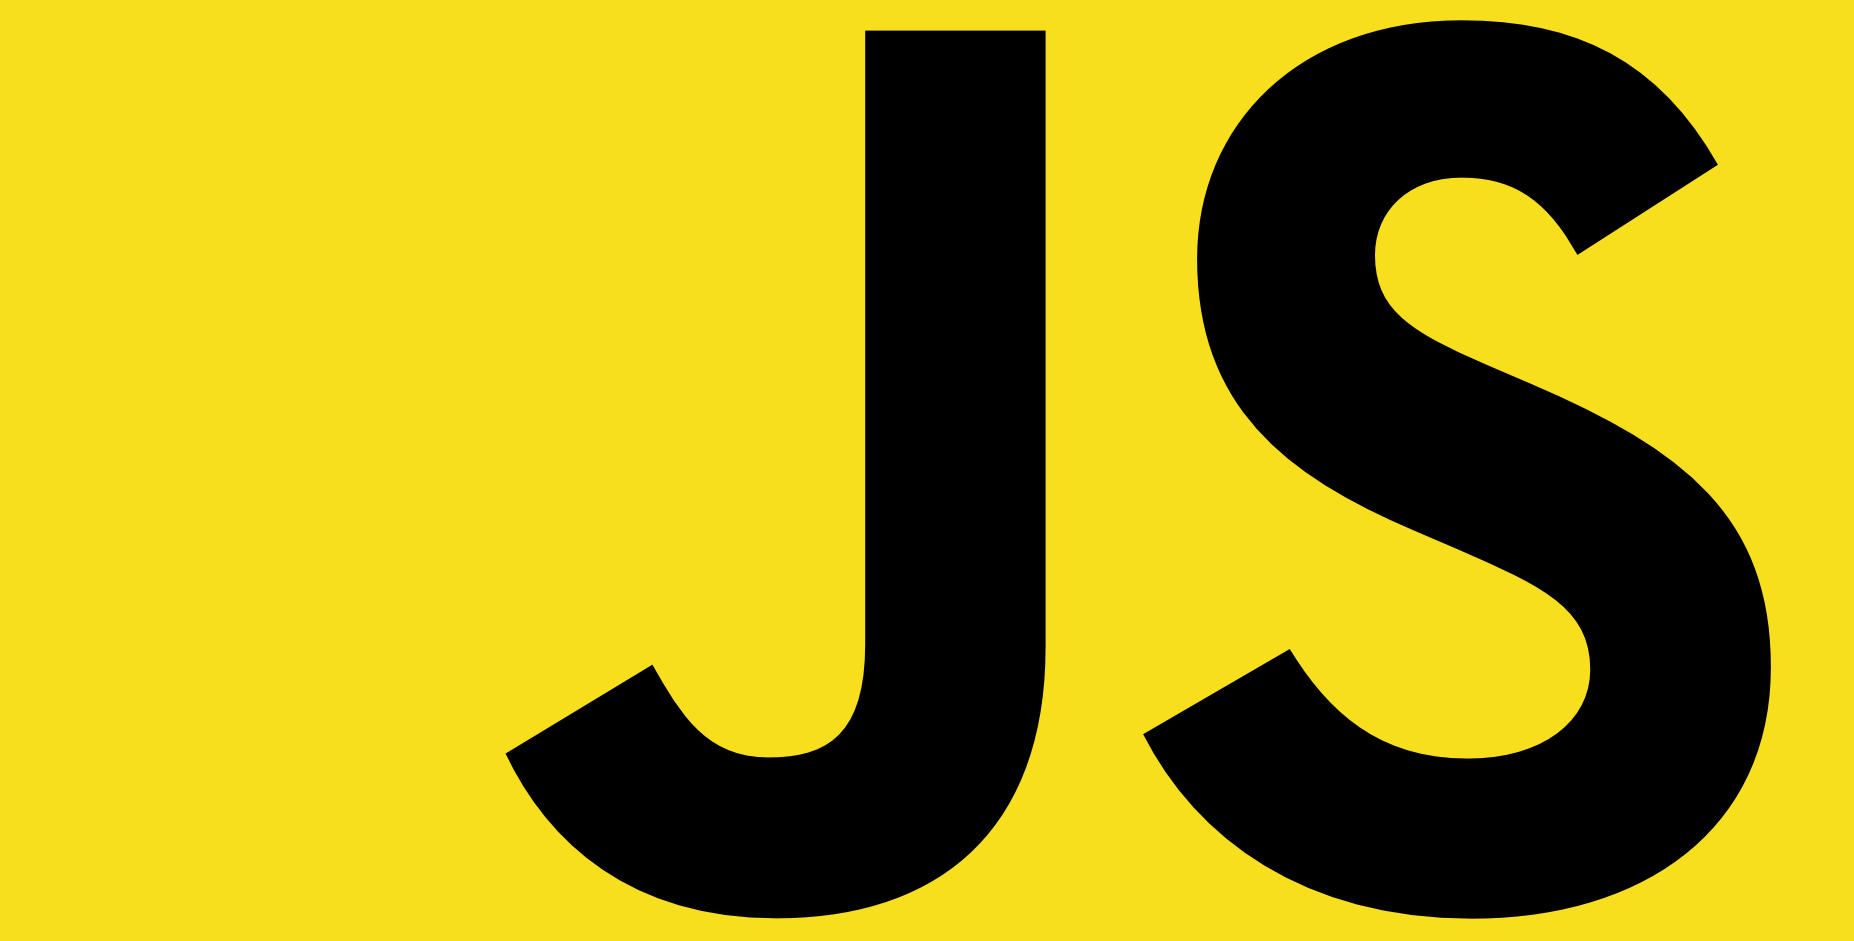 Some facts about Javascript that you should know for a Job Interview.